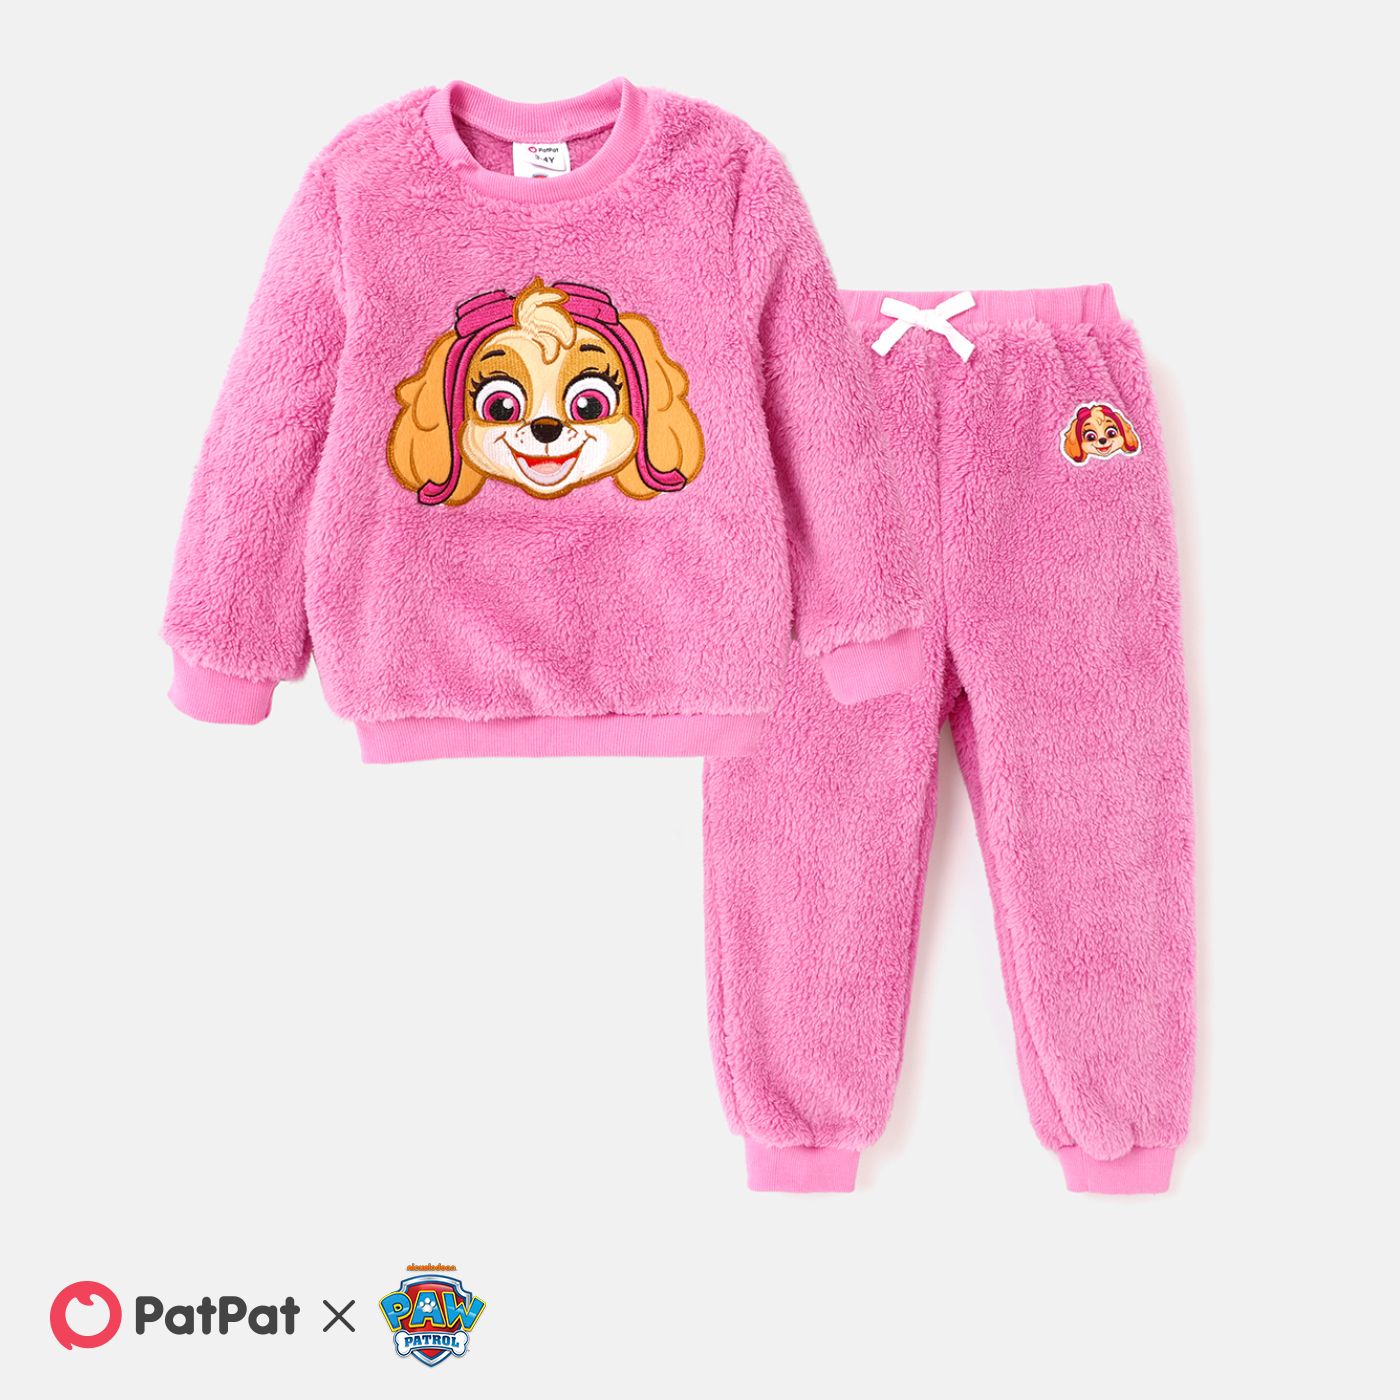 

PAW Patrol 2pcs Toddler Girl/Boy Character Print Fuzzy Pullover and Pants Set